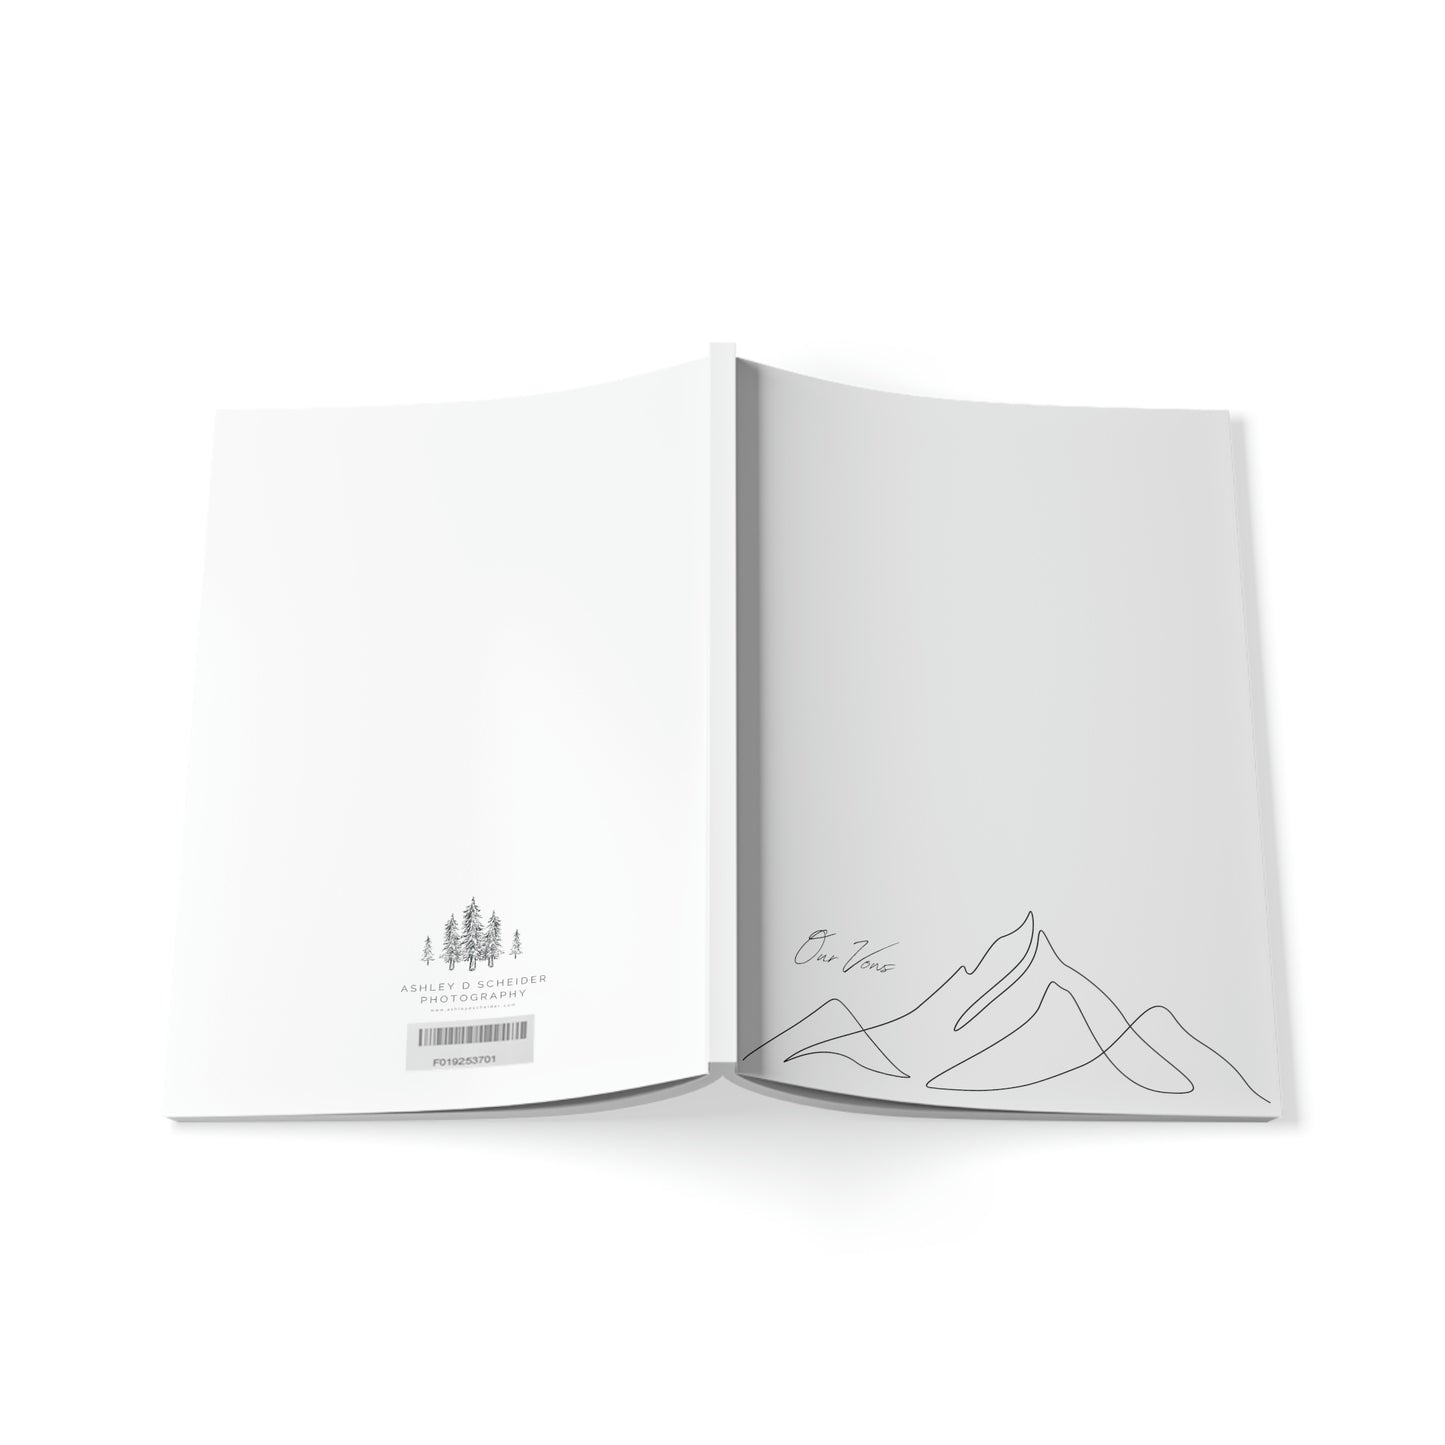 Our Vows Softcover Notebook, A5